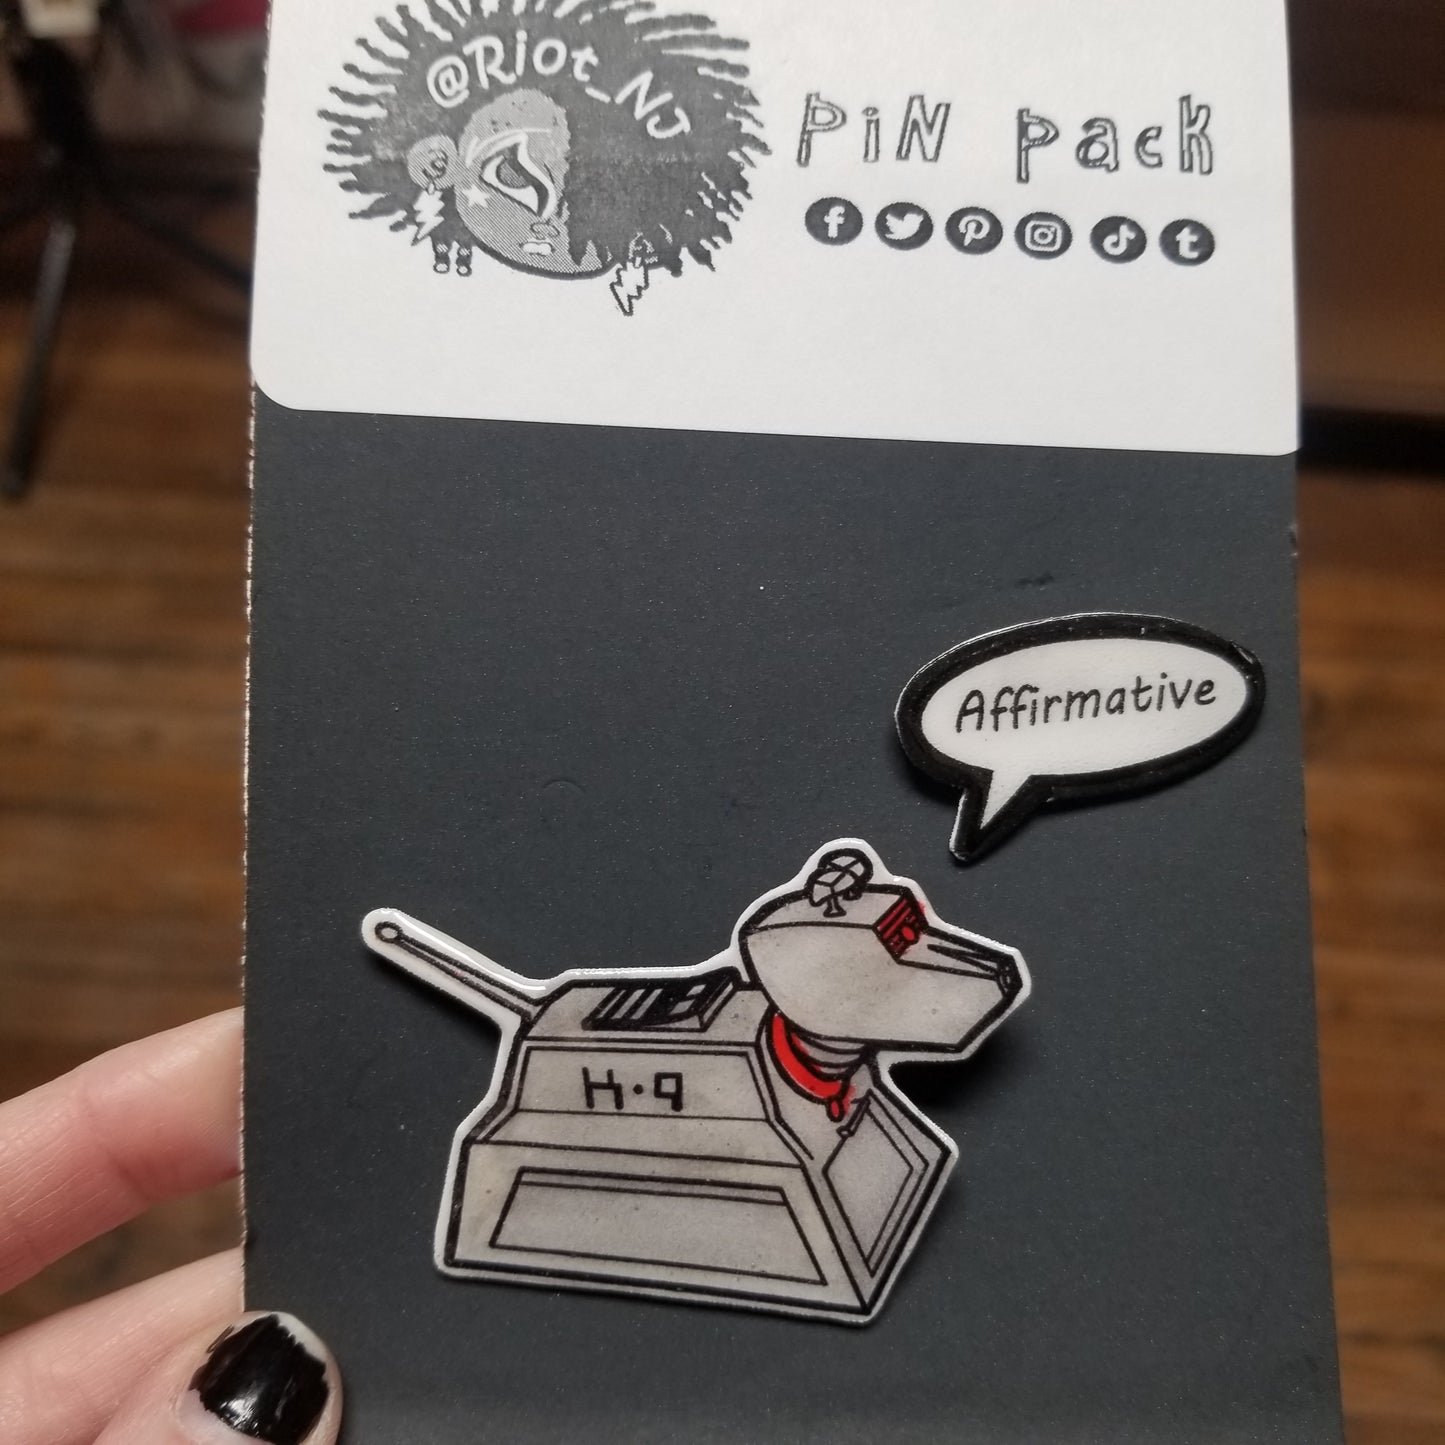 K9 PIN PACK by Riot NJ